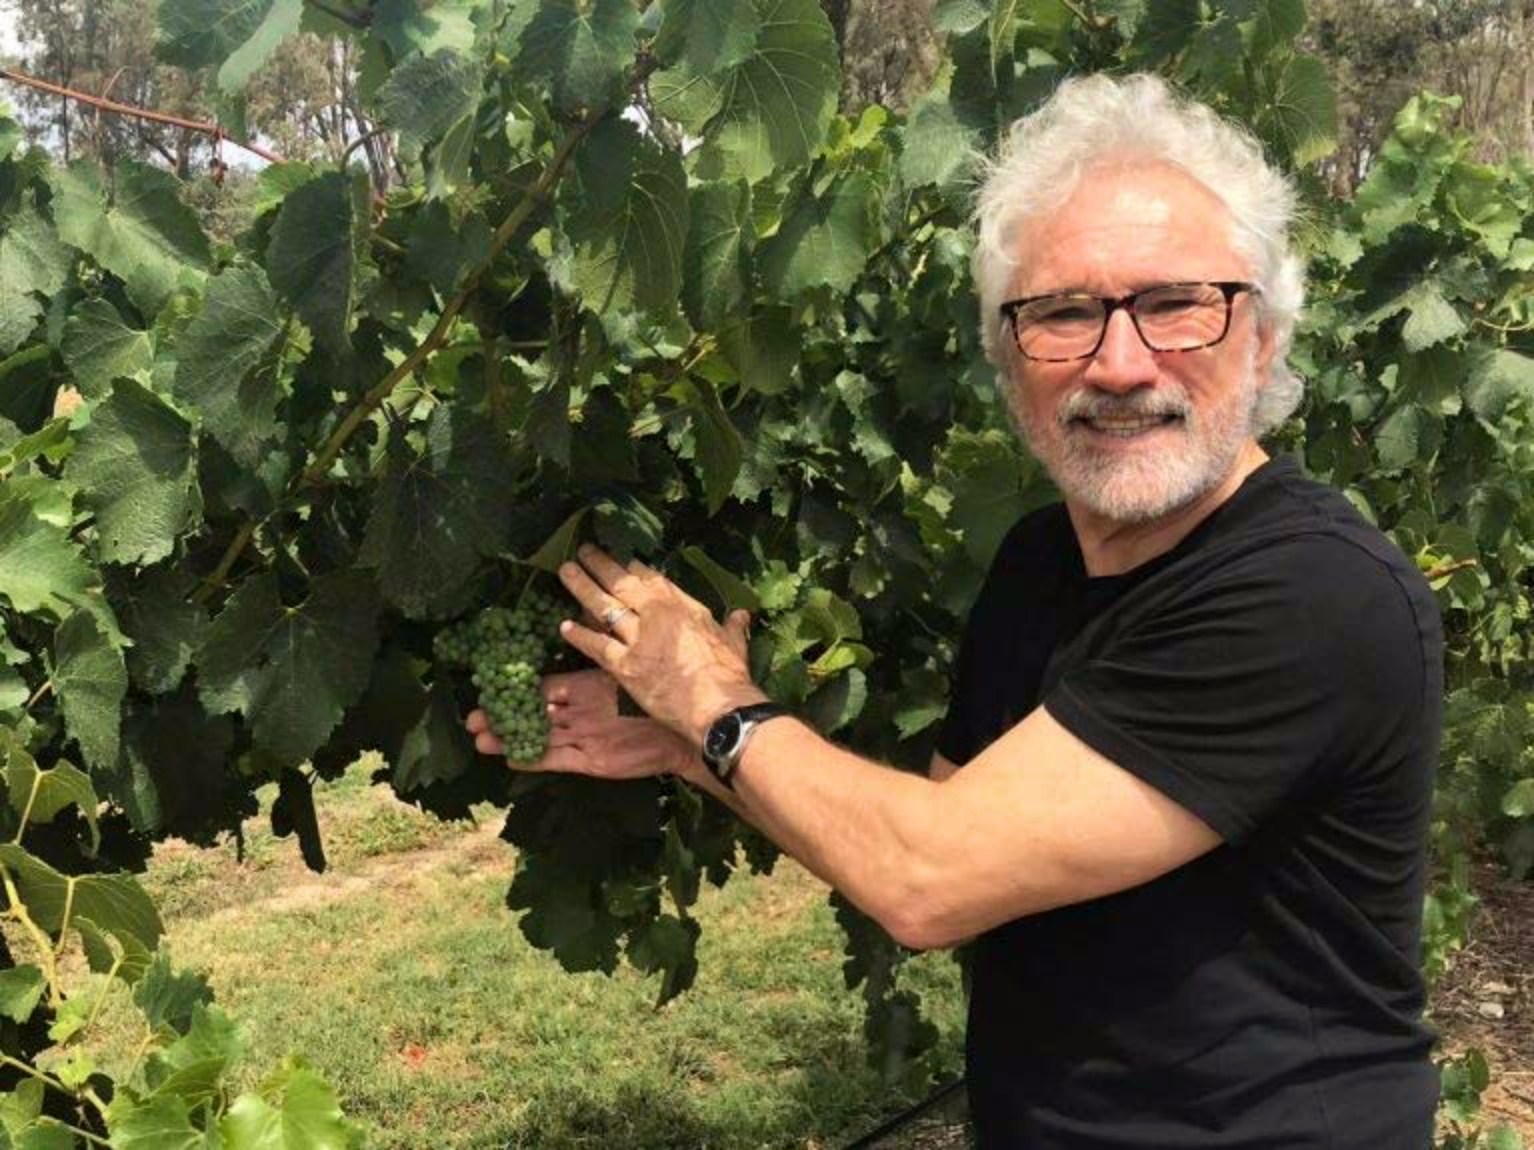 Photo of Steliano amongst the grapes at a winery